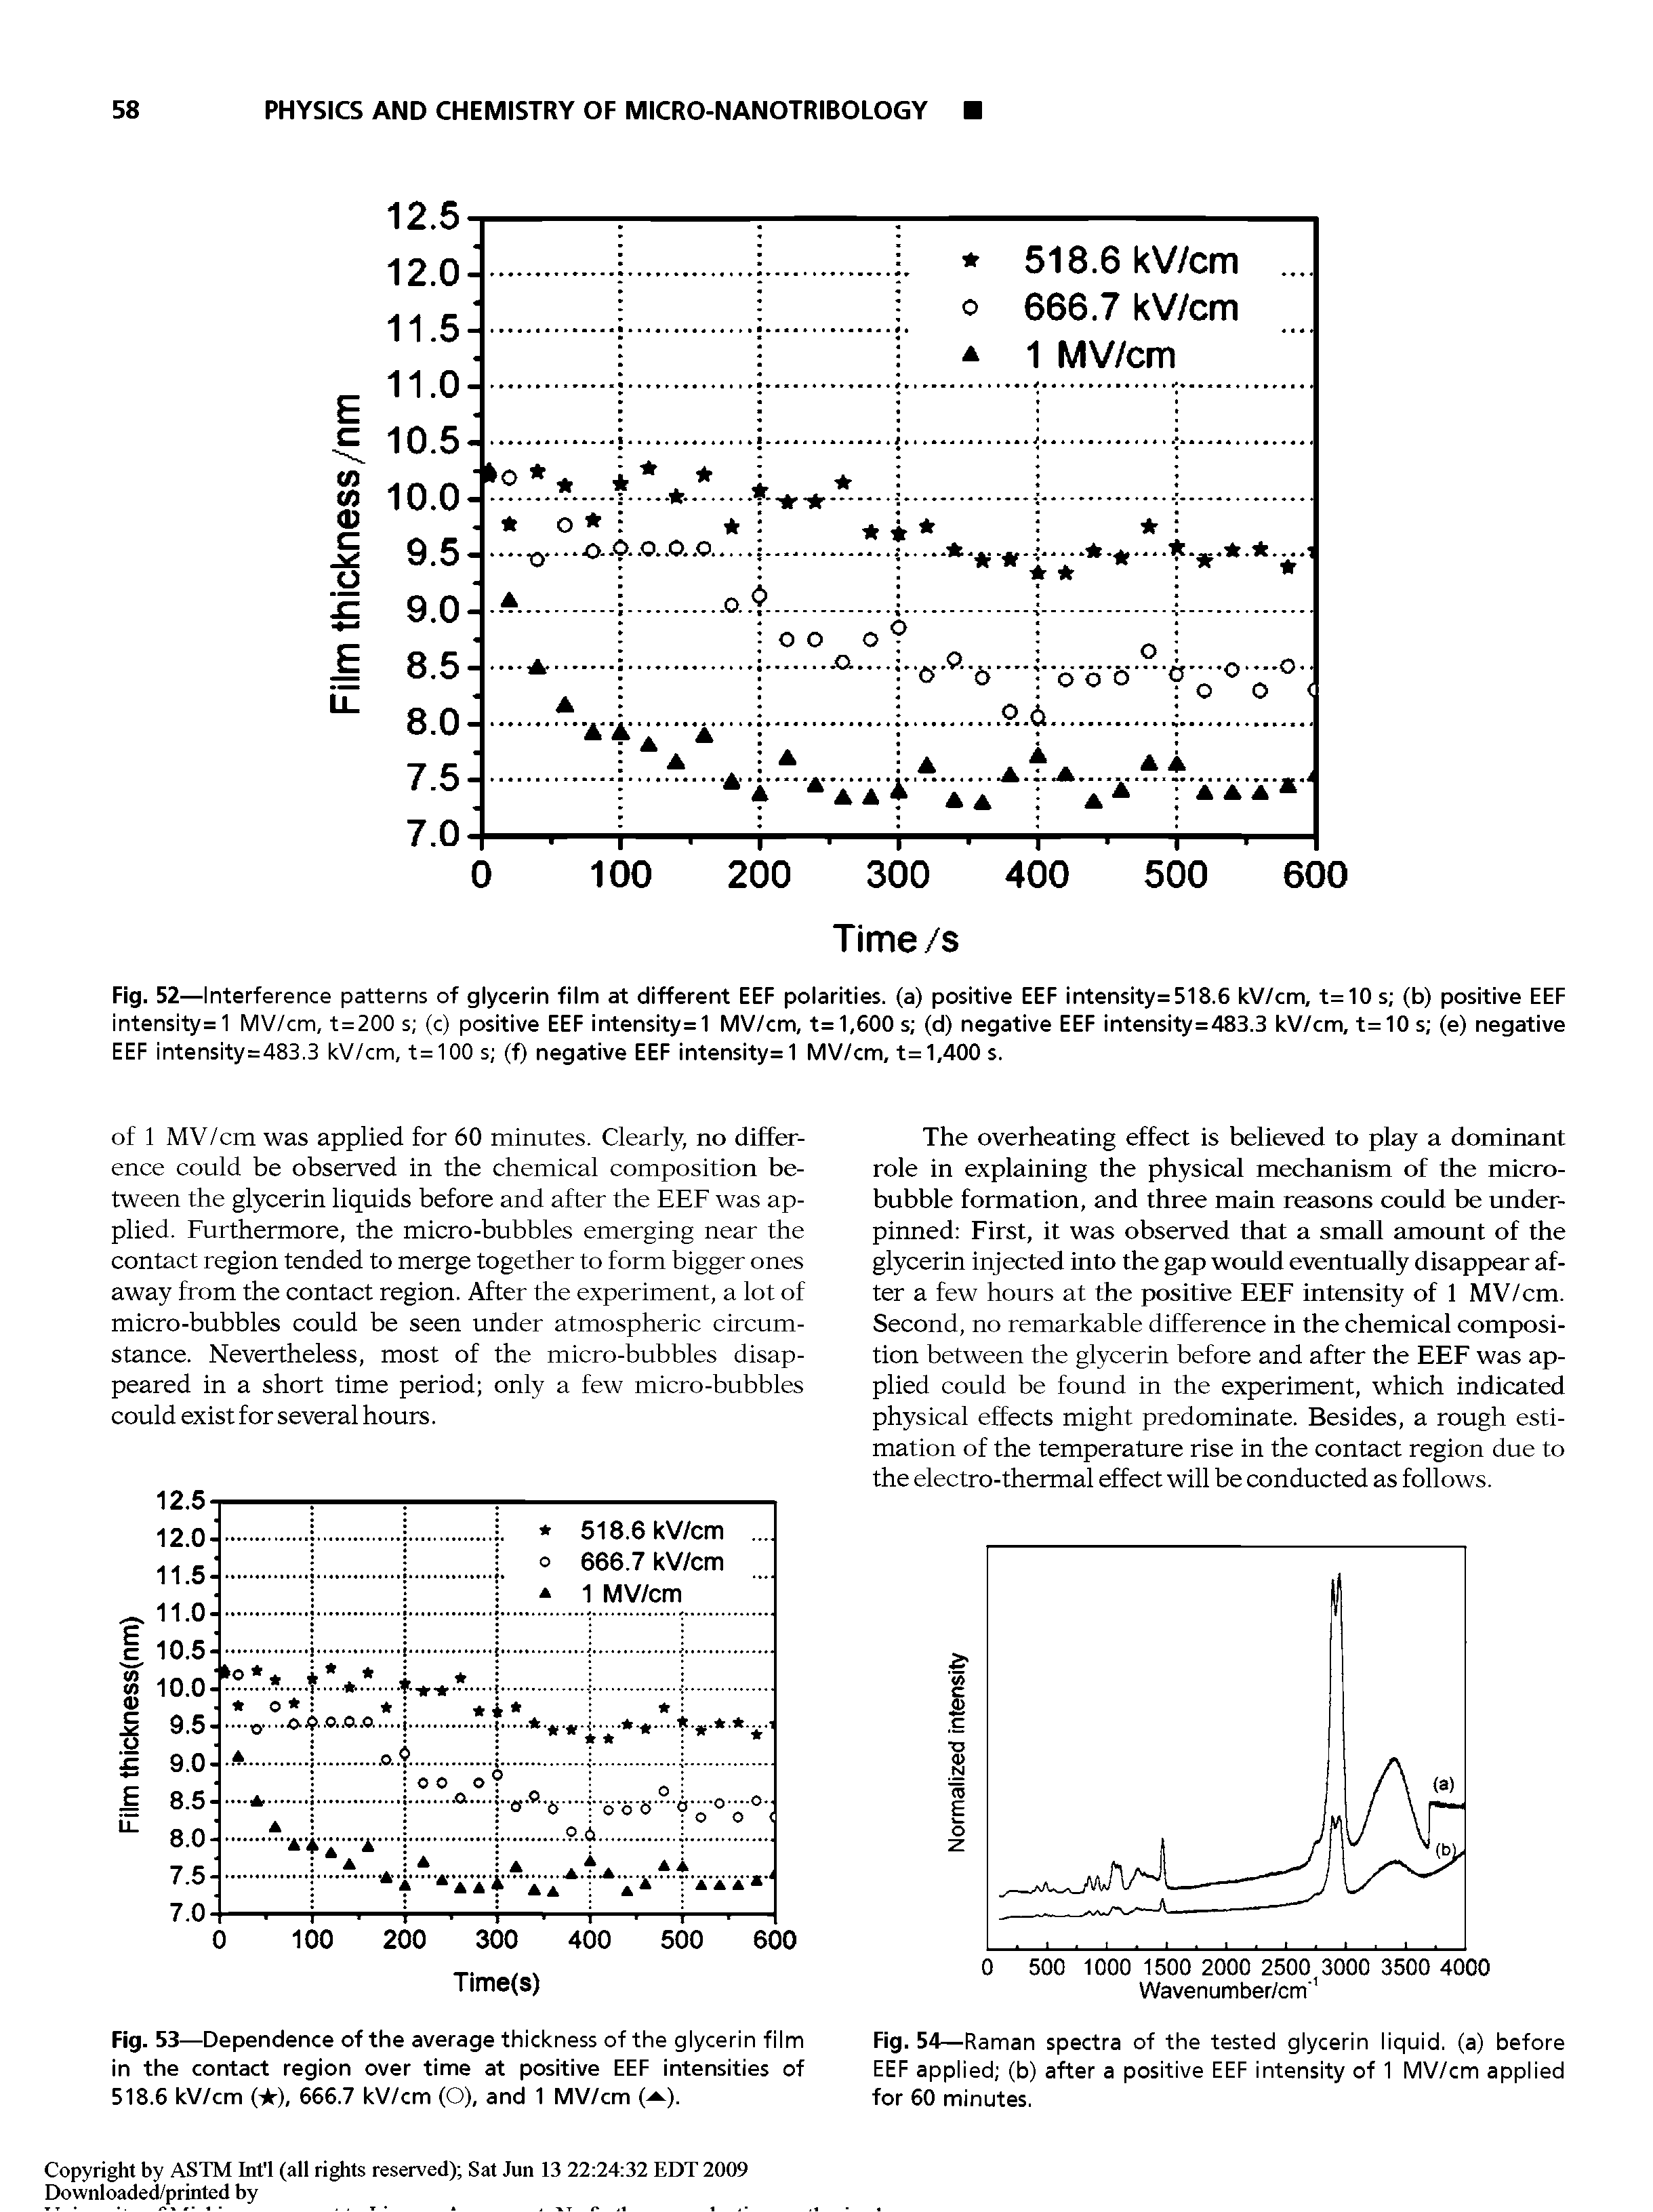 Fig. 53—Dependence of the average thickness of the glycerin film in the contact region over time at positive EEF intensities of 518.6 kV/cm ( ), 666.7 kV/cm (O), and 1 MV/cm (. ).